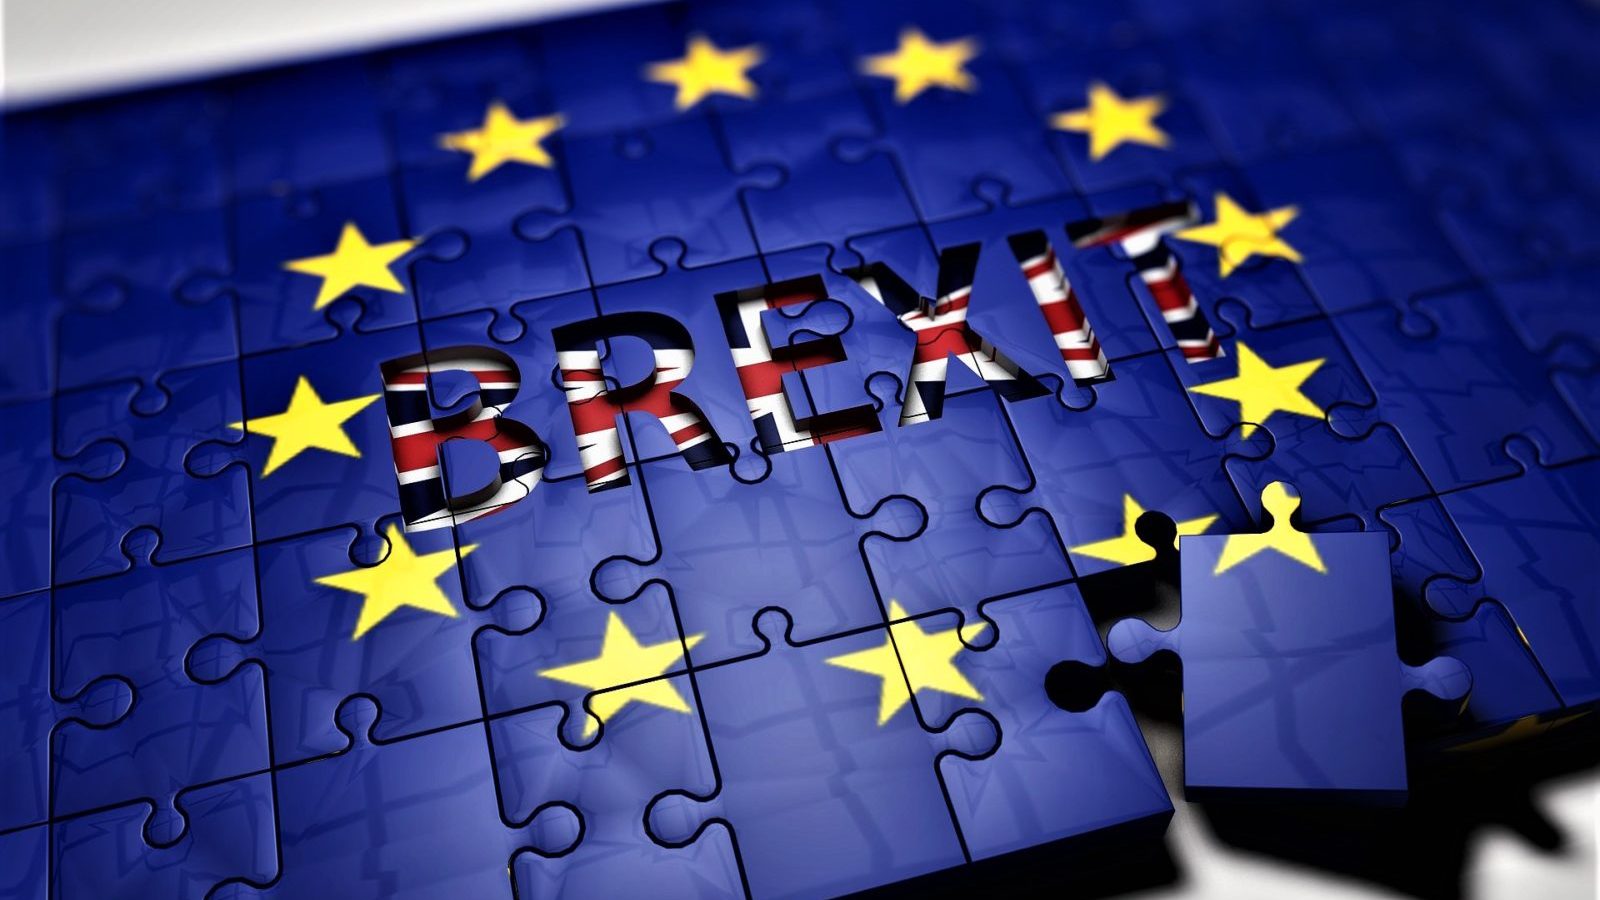 Blog - Operational Resiliency Beyond Brexit